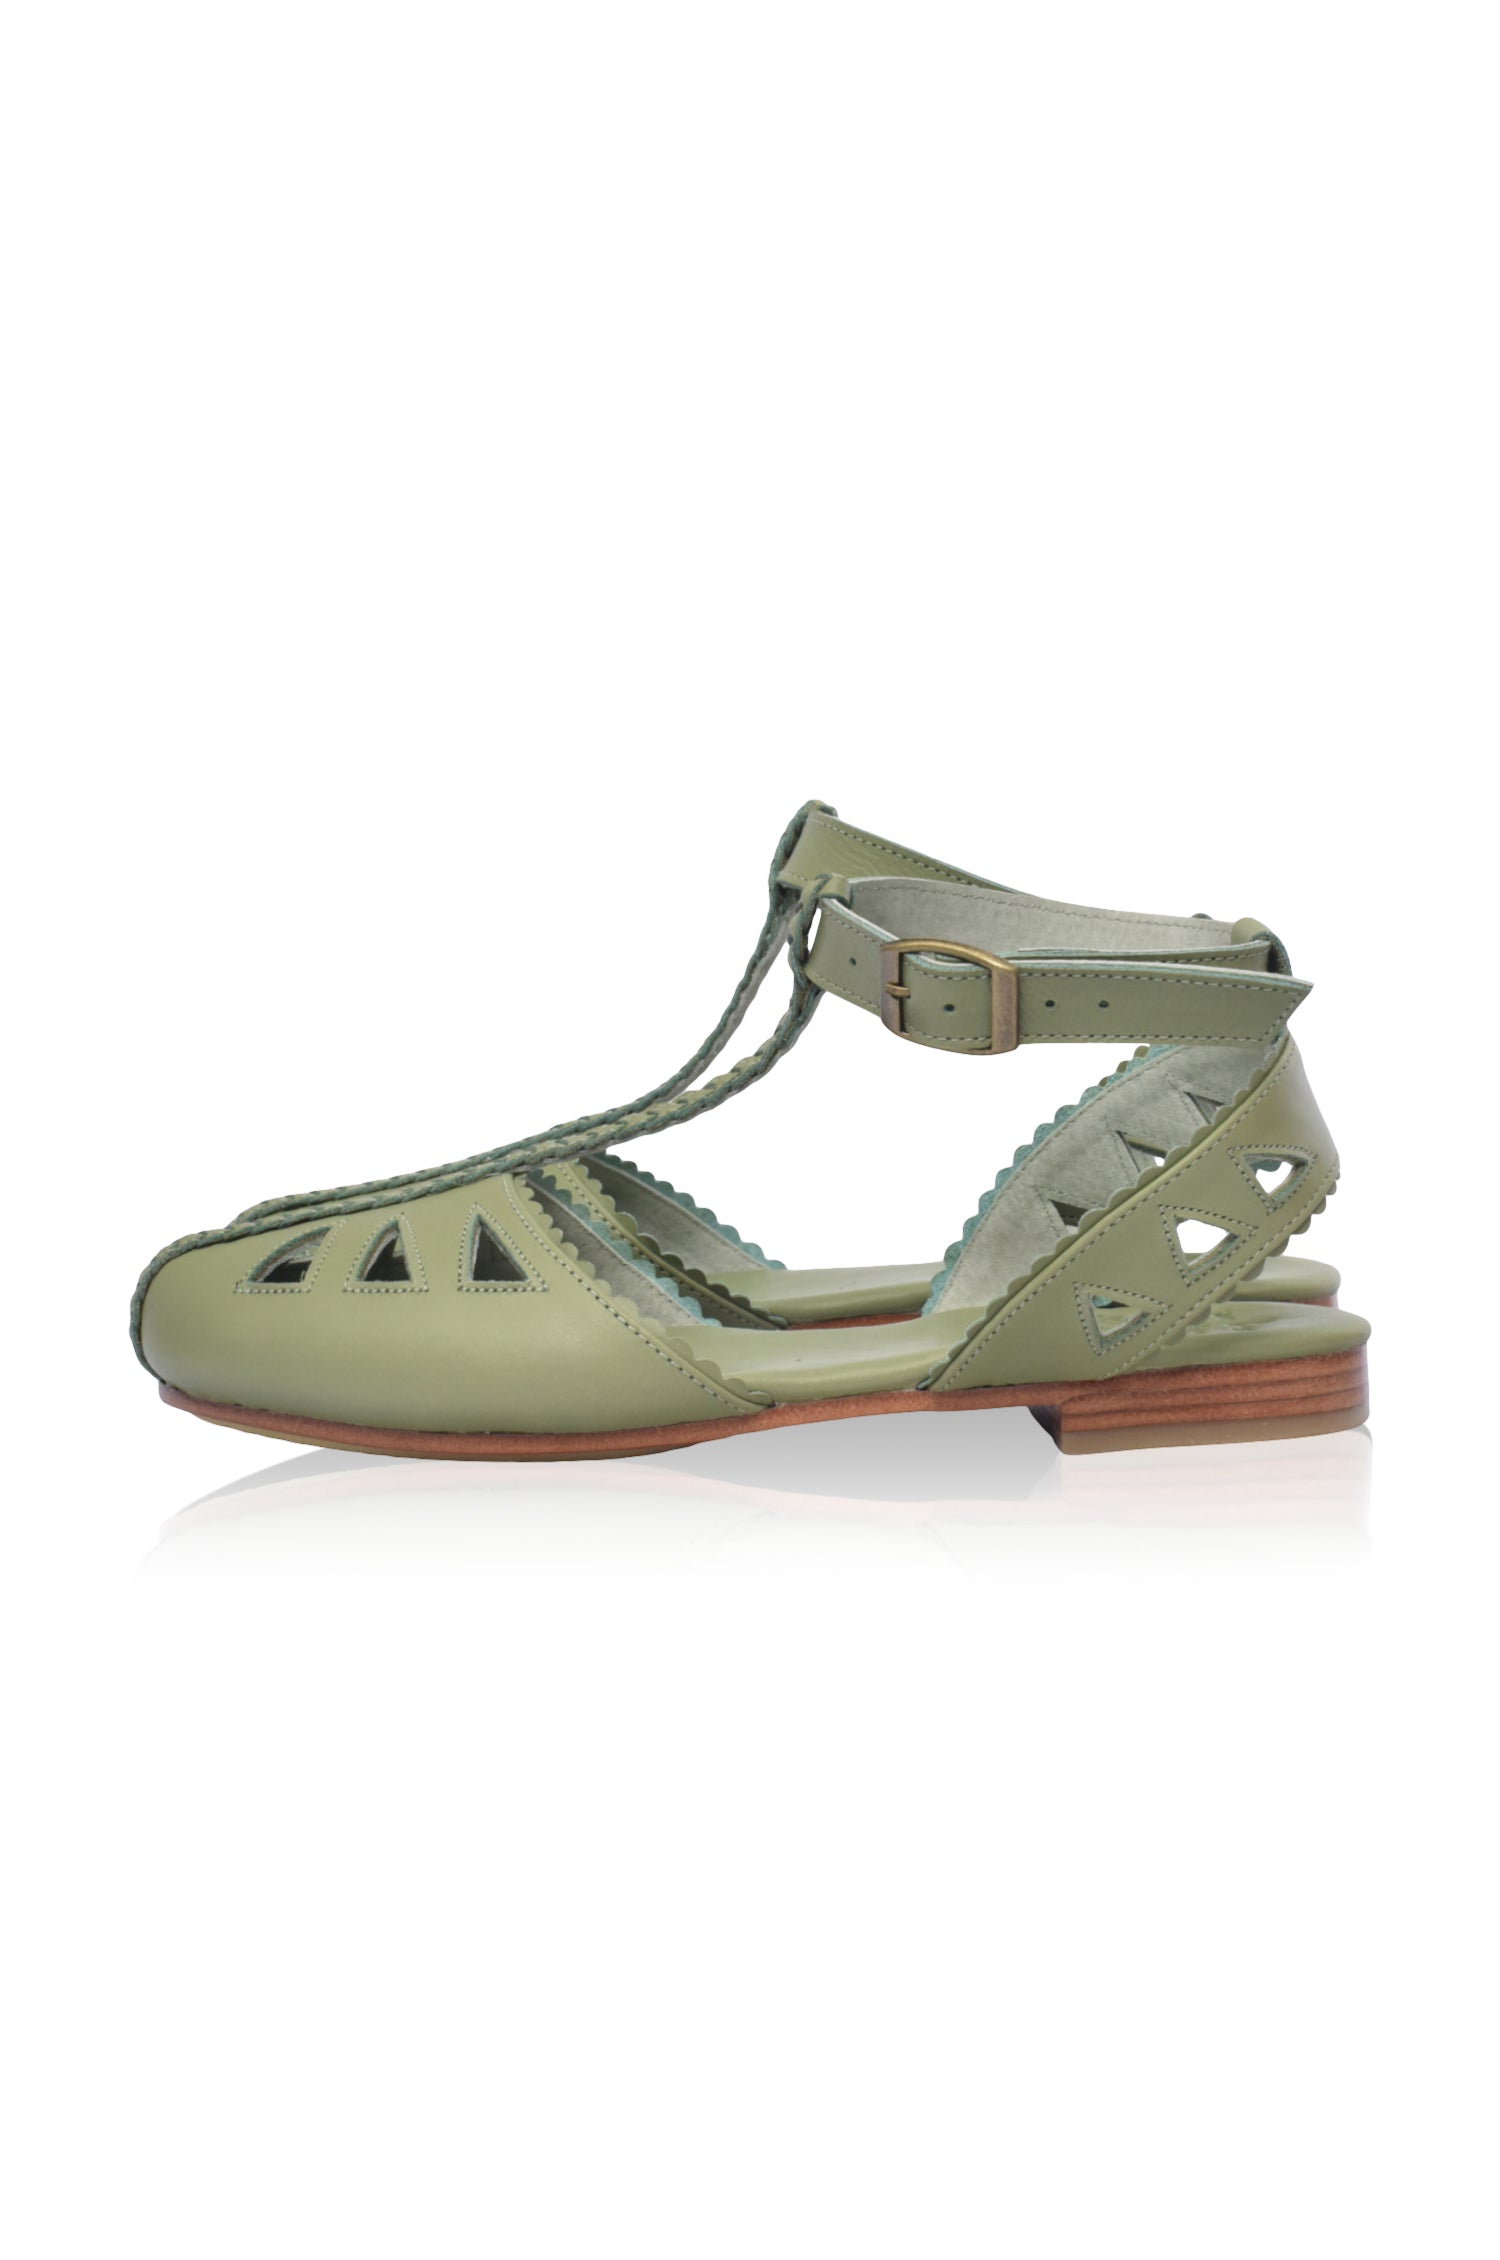 Bounty T-strap Leather Sandals. – ELF